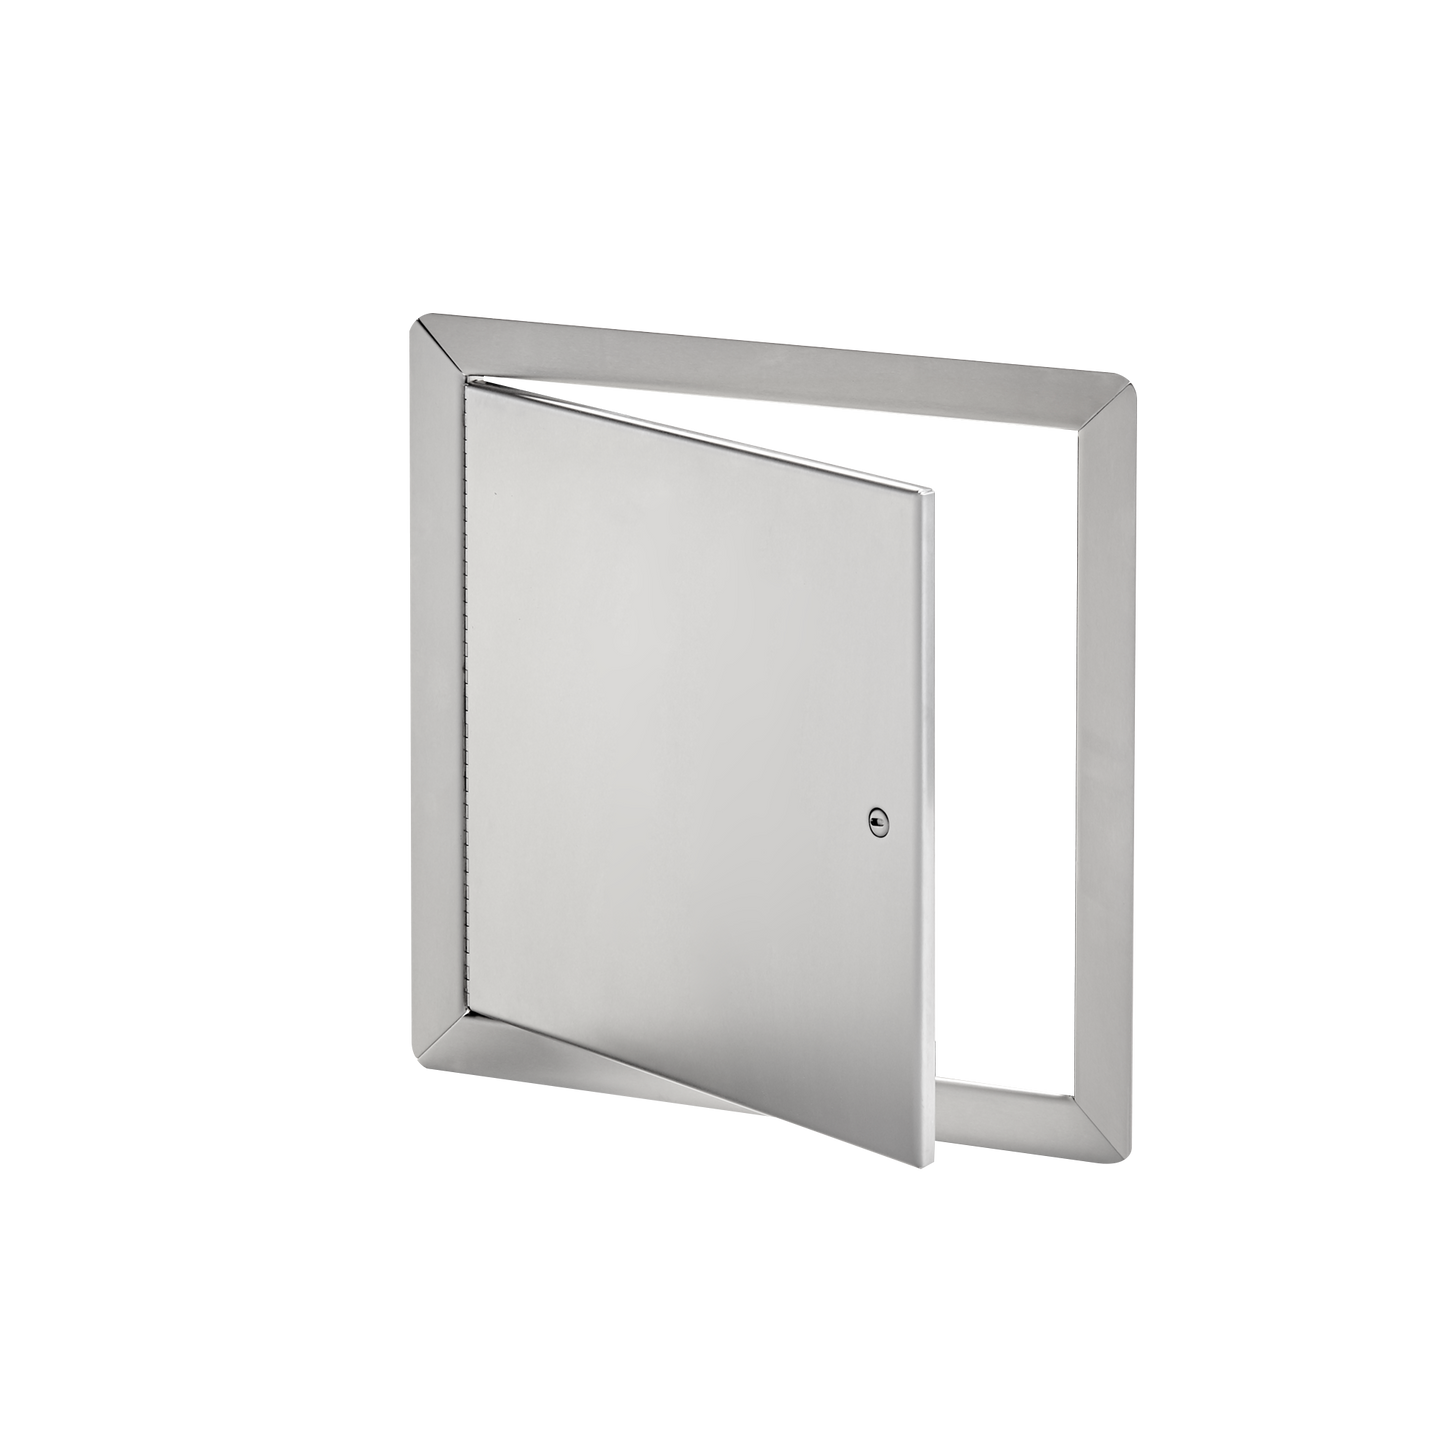 6"x6" Flush Universal Stainless Steel Access Door with Exposed Flange, Cendrex